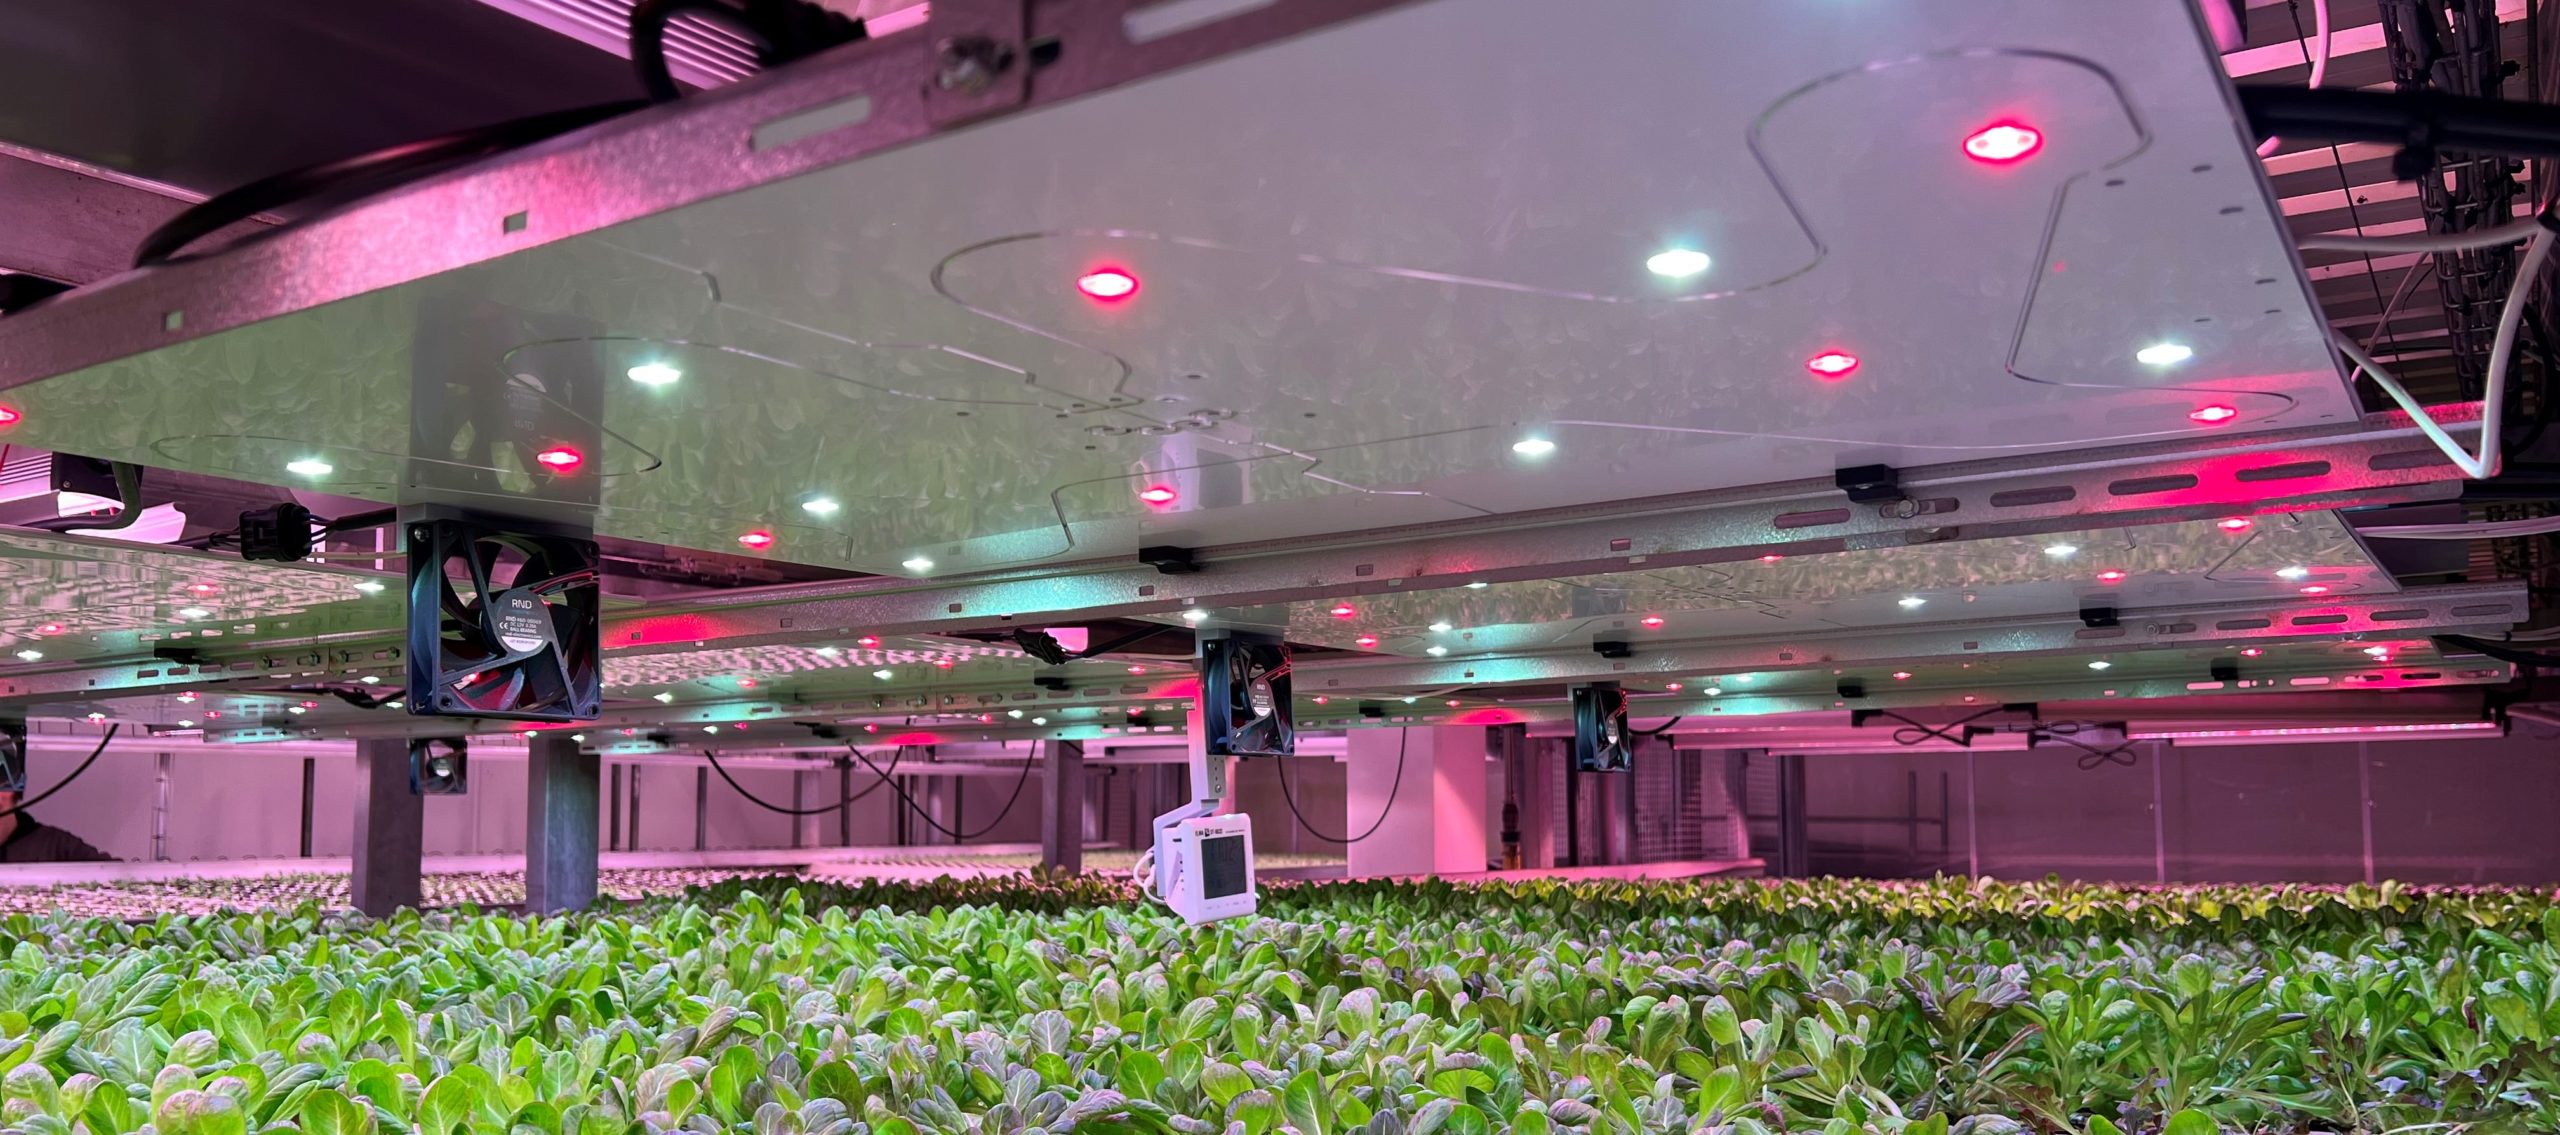 Gracy, our panel for vertical farming lighting up a layer of leafy greens